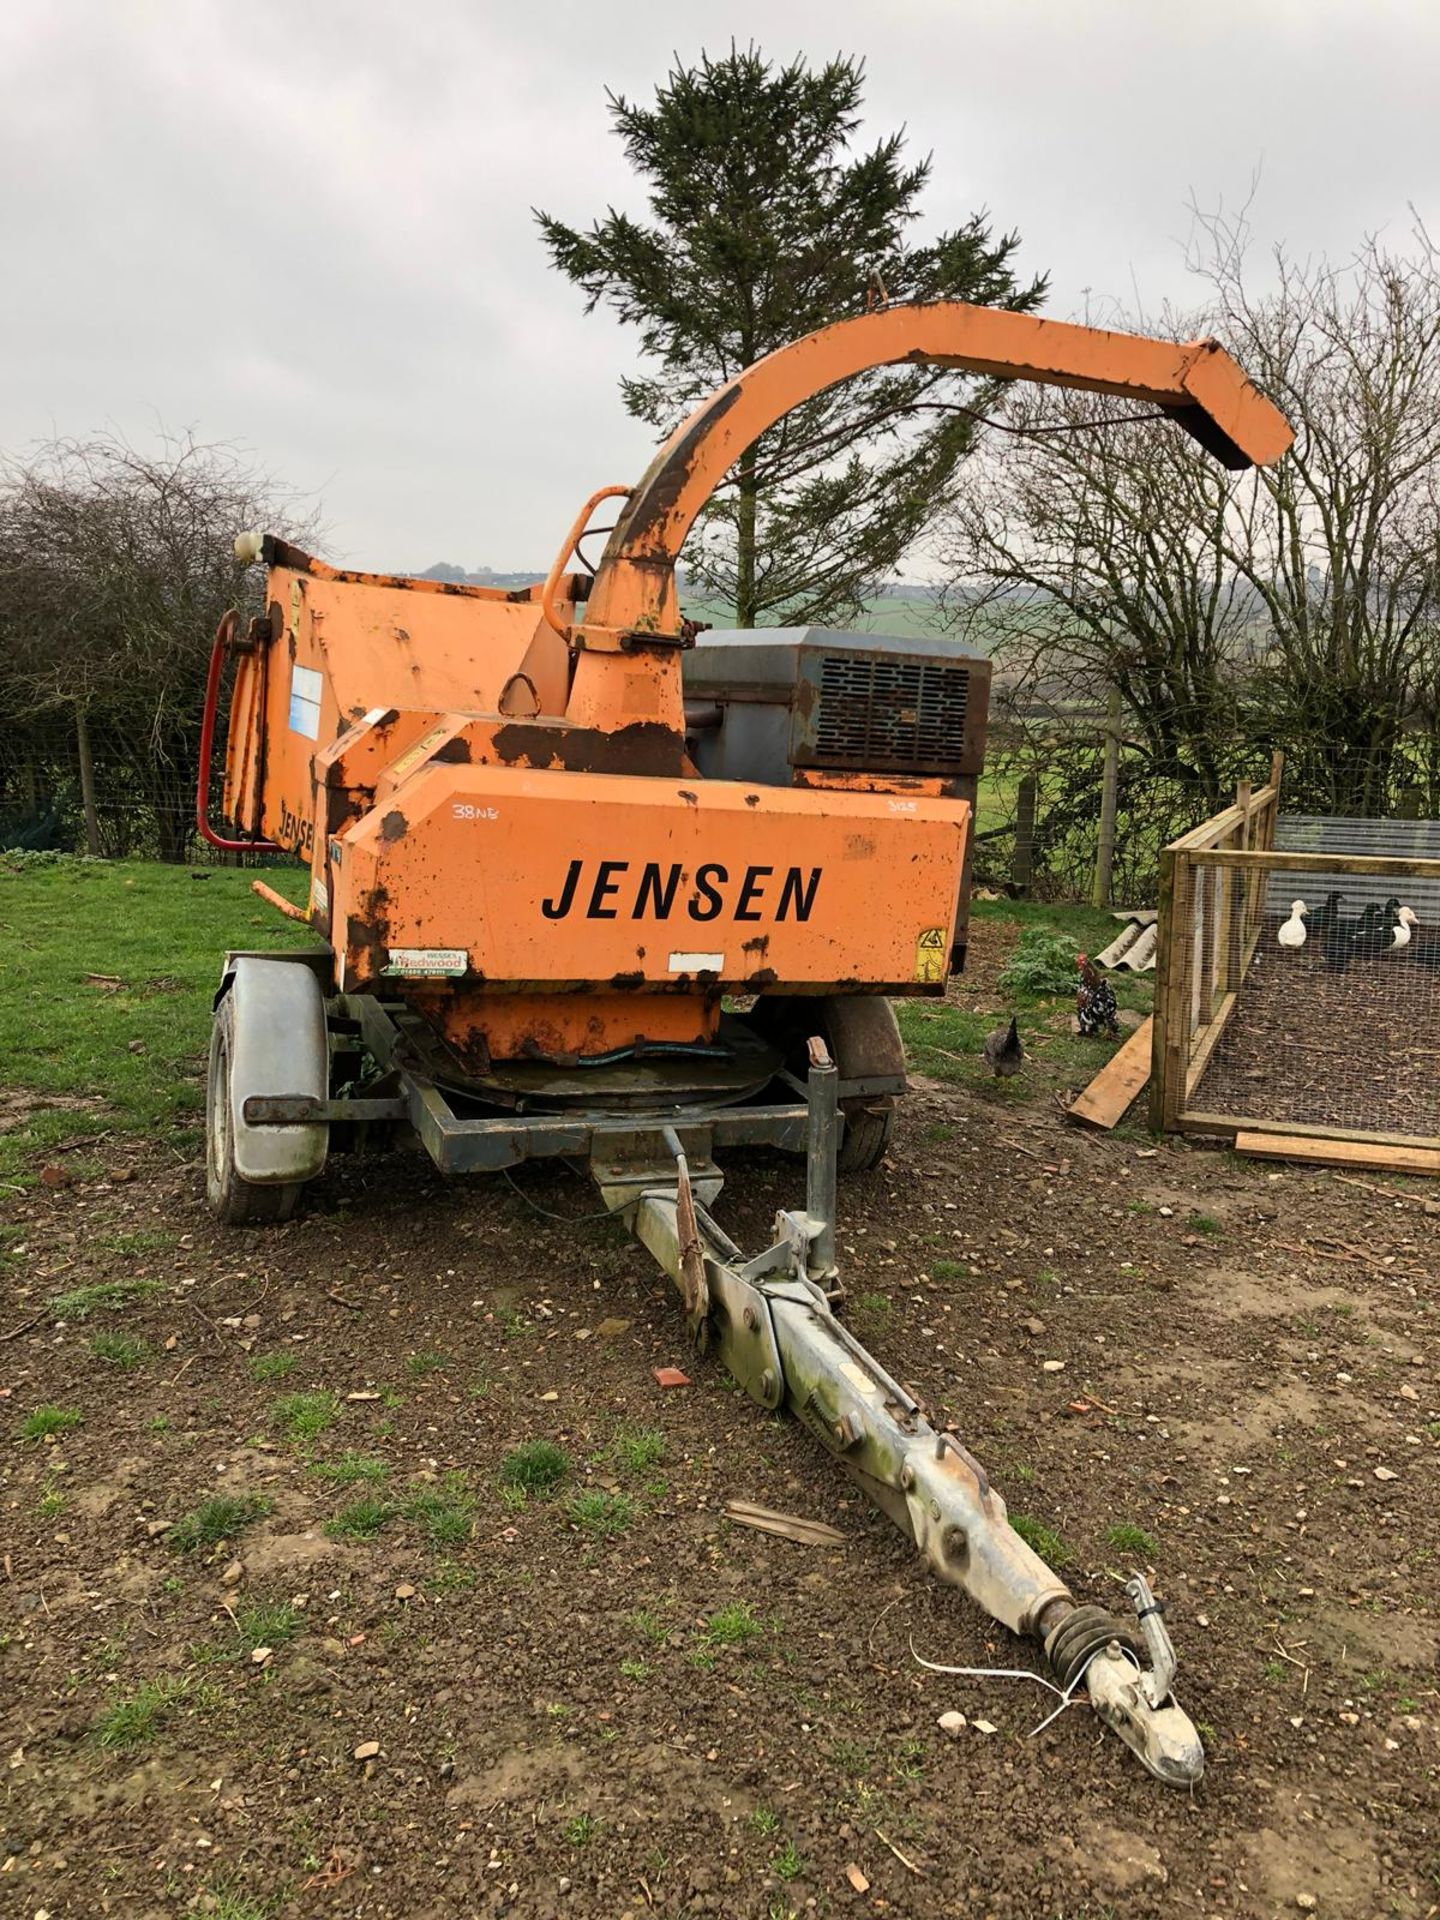 DS - QUALITY 2004 JENSEN DIESEL TURNTABLE CHIPPER, QUALITY TRAILER - Image 2 of 8